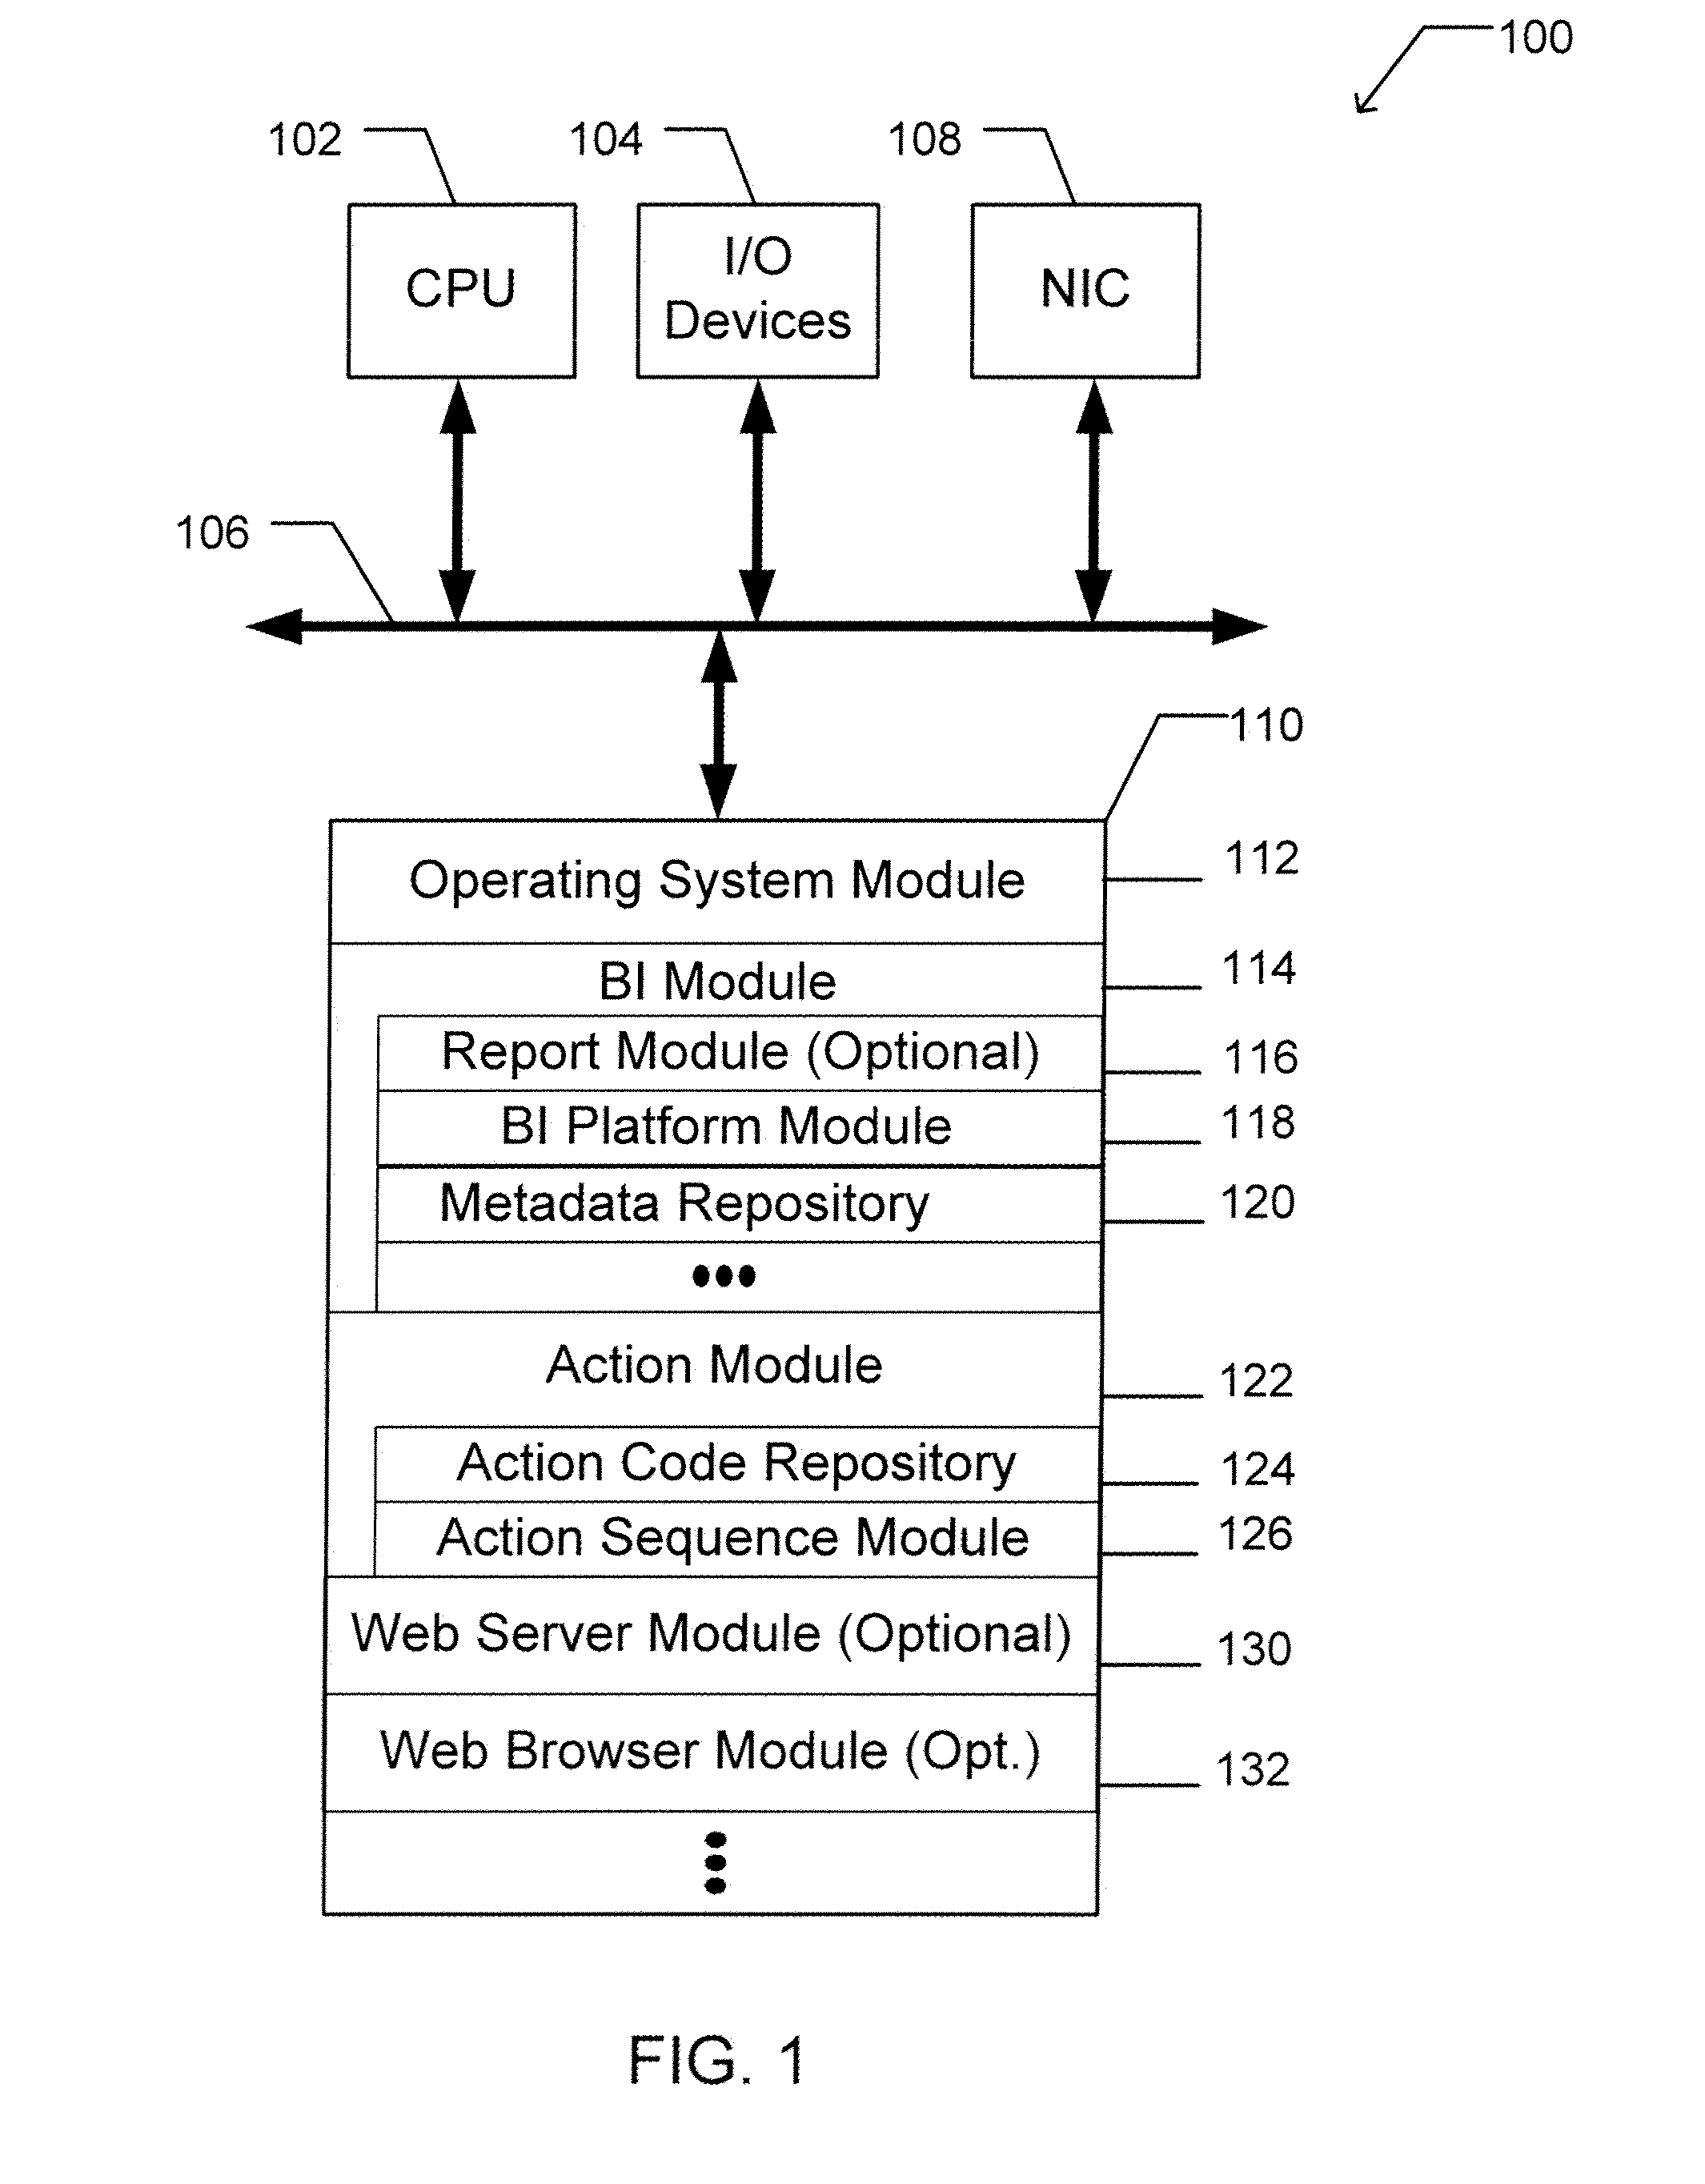 Apparatus and method for dynamically selecting componentized executable instructions at run time